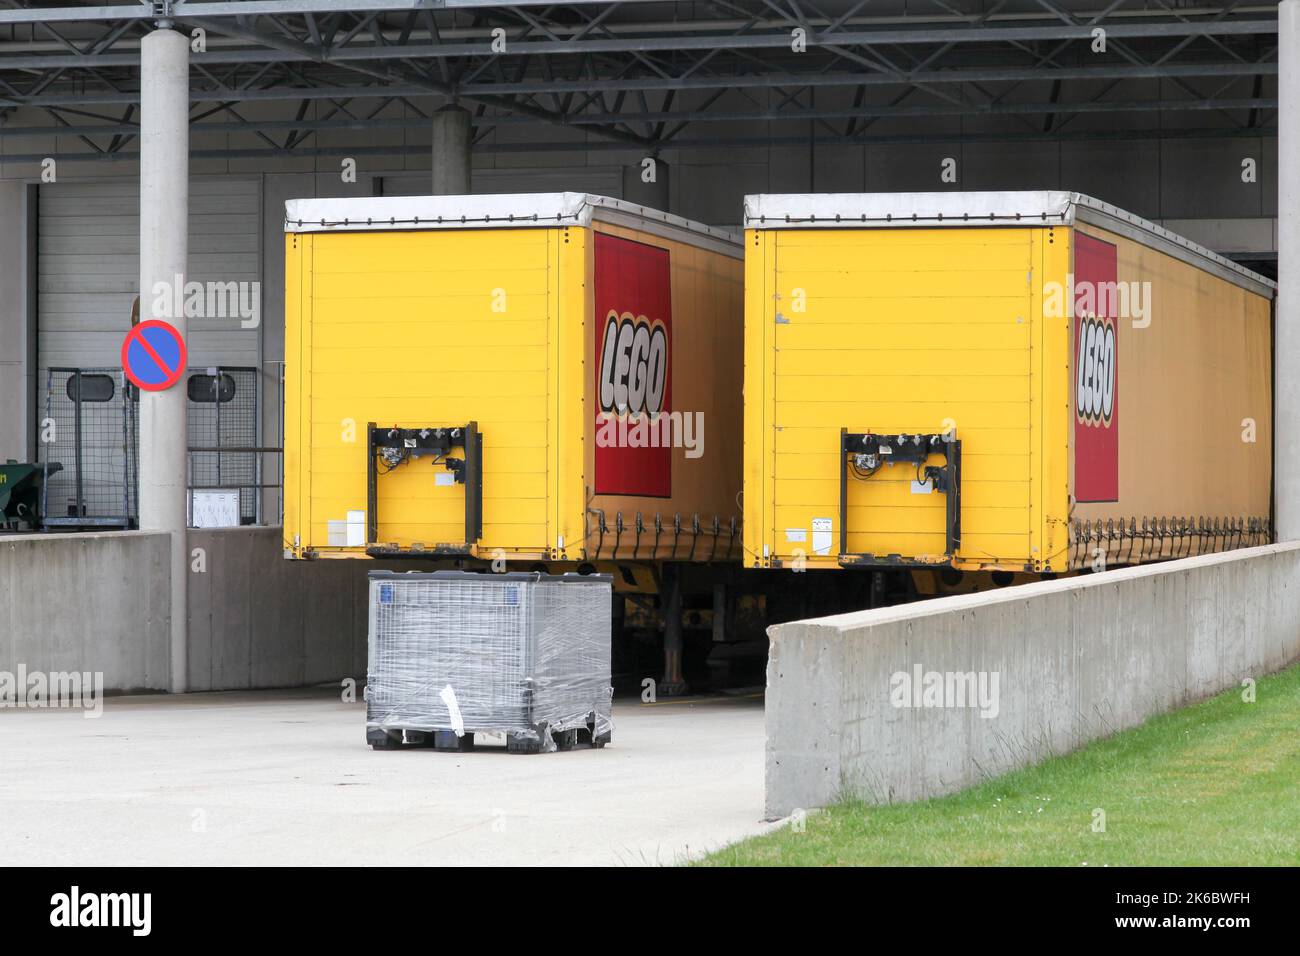 Billund, Denmark - May 14, 2016: Lego trucks and warehouse. Lego is a line of plastic construction toys that are manufactured by the Lego Group Stock Photo